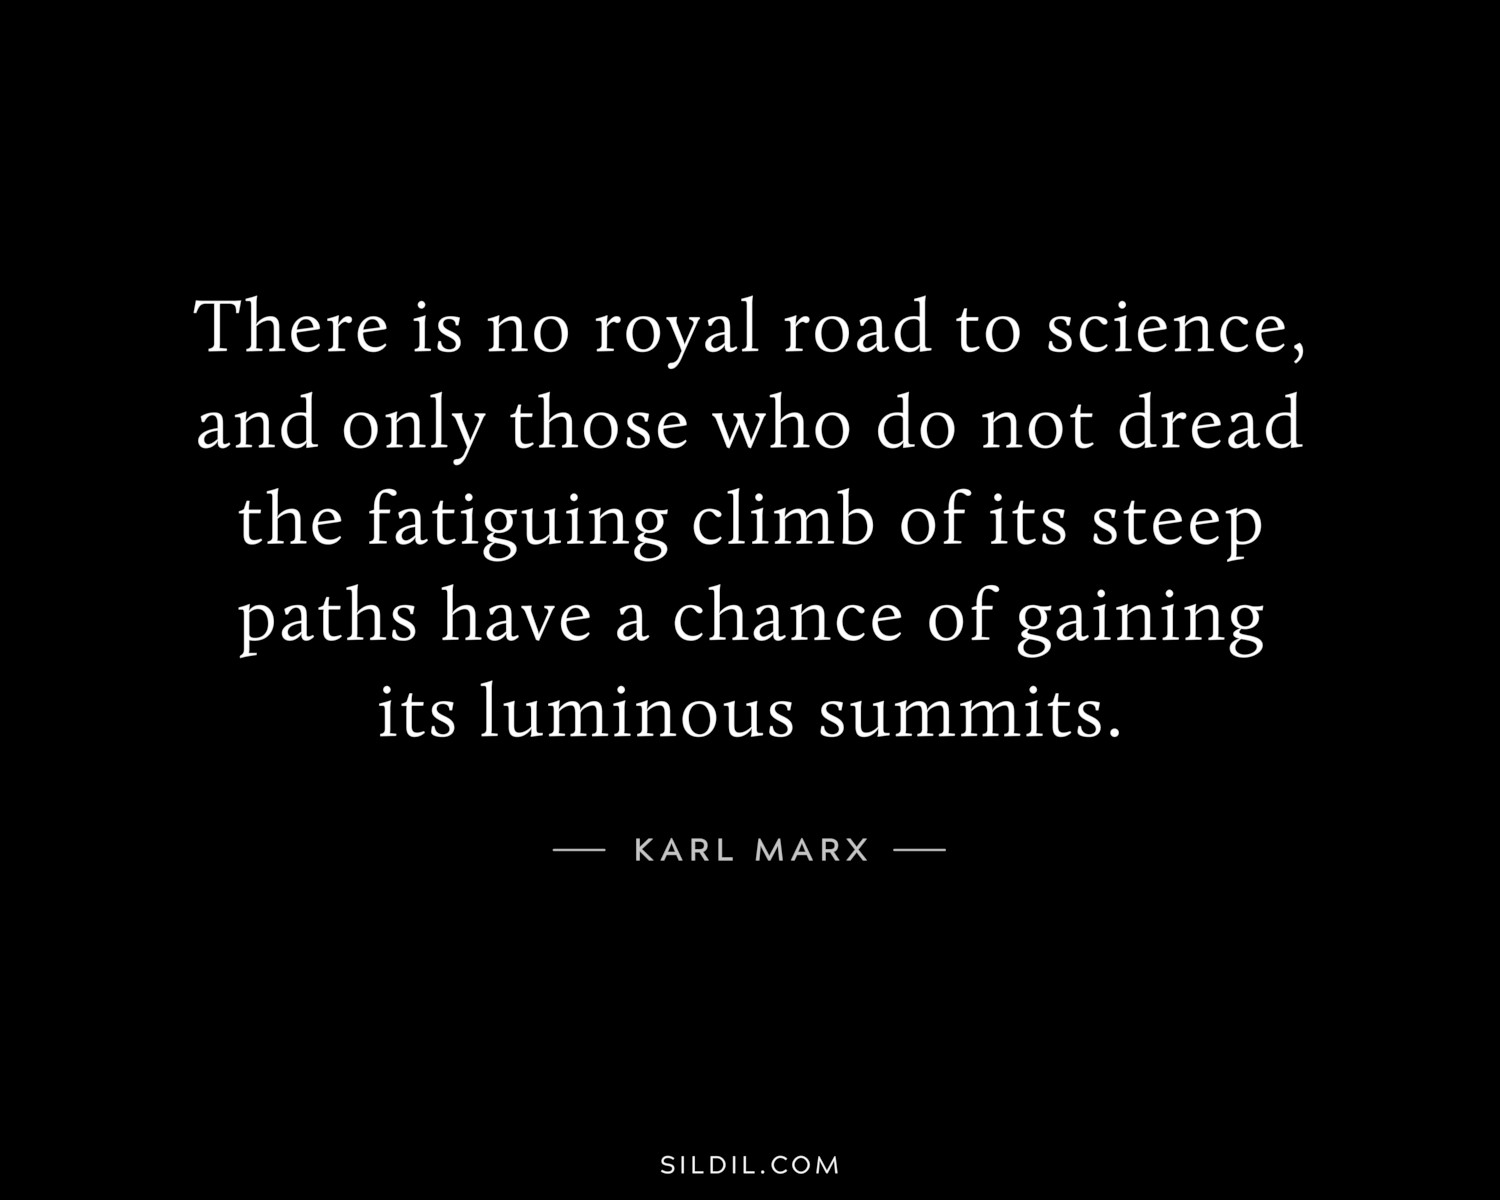 There is no royal road to science, and only those who do not dread the fatiguing climb of its steep paths have a chance of gaining its luminous summits.